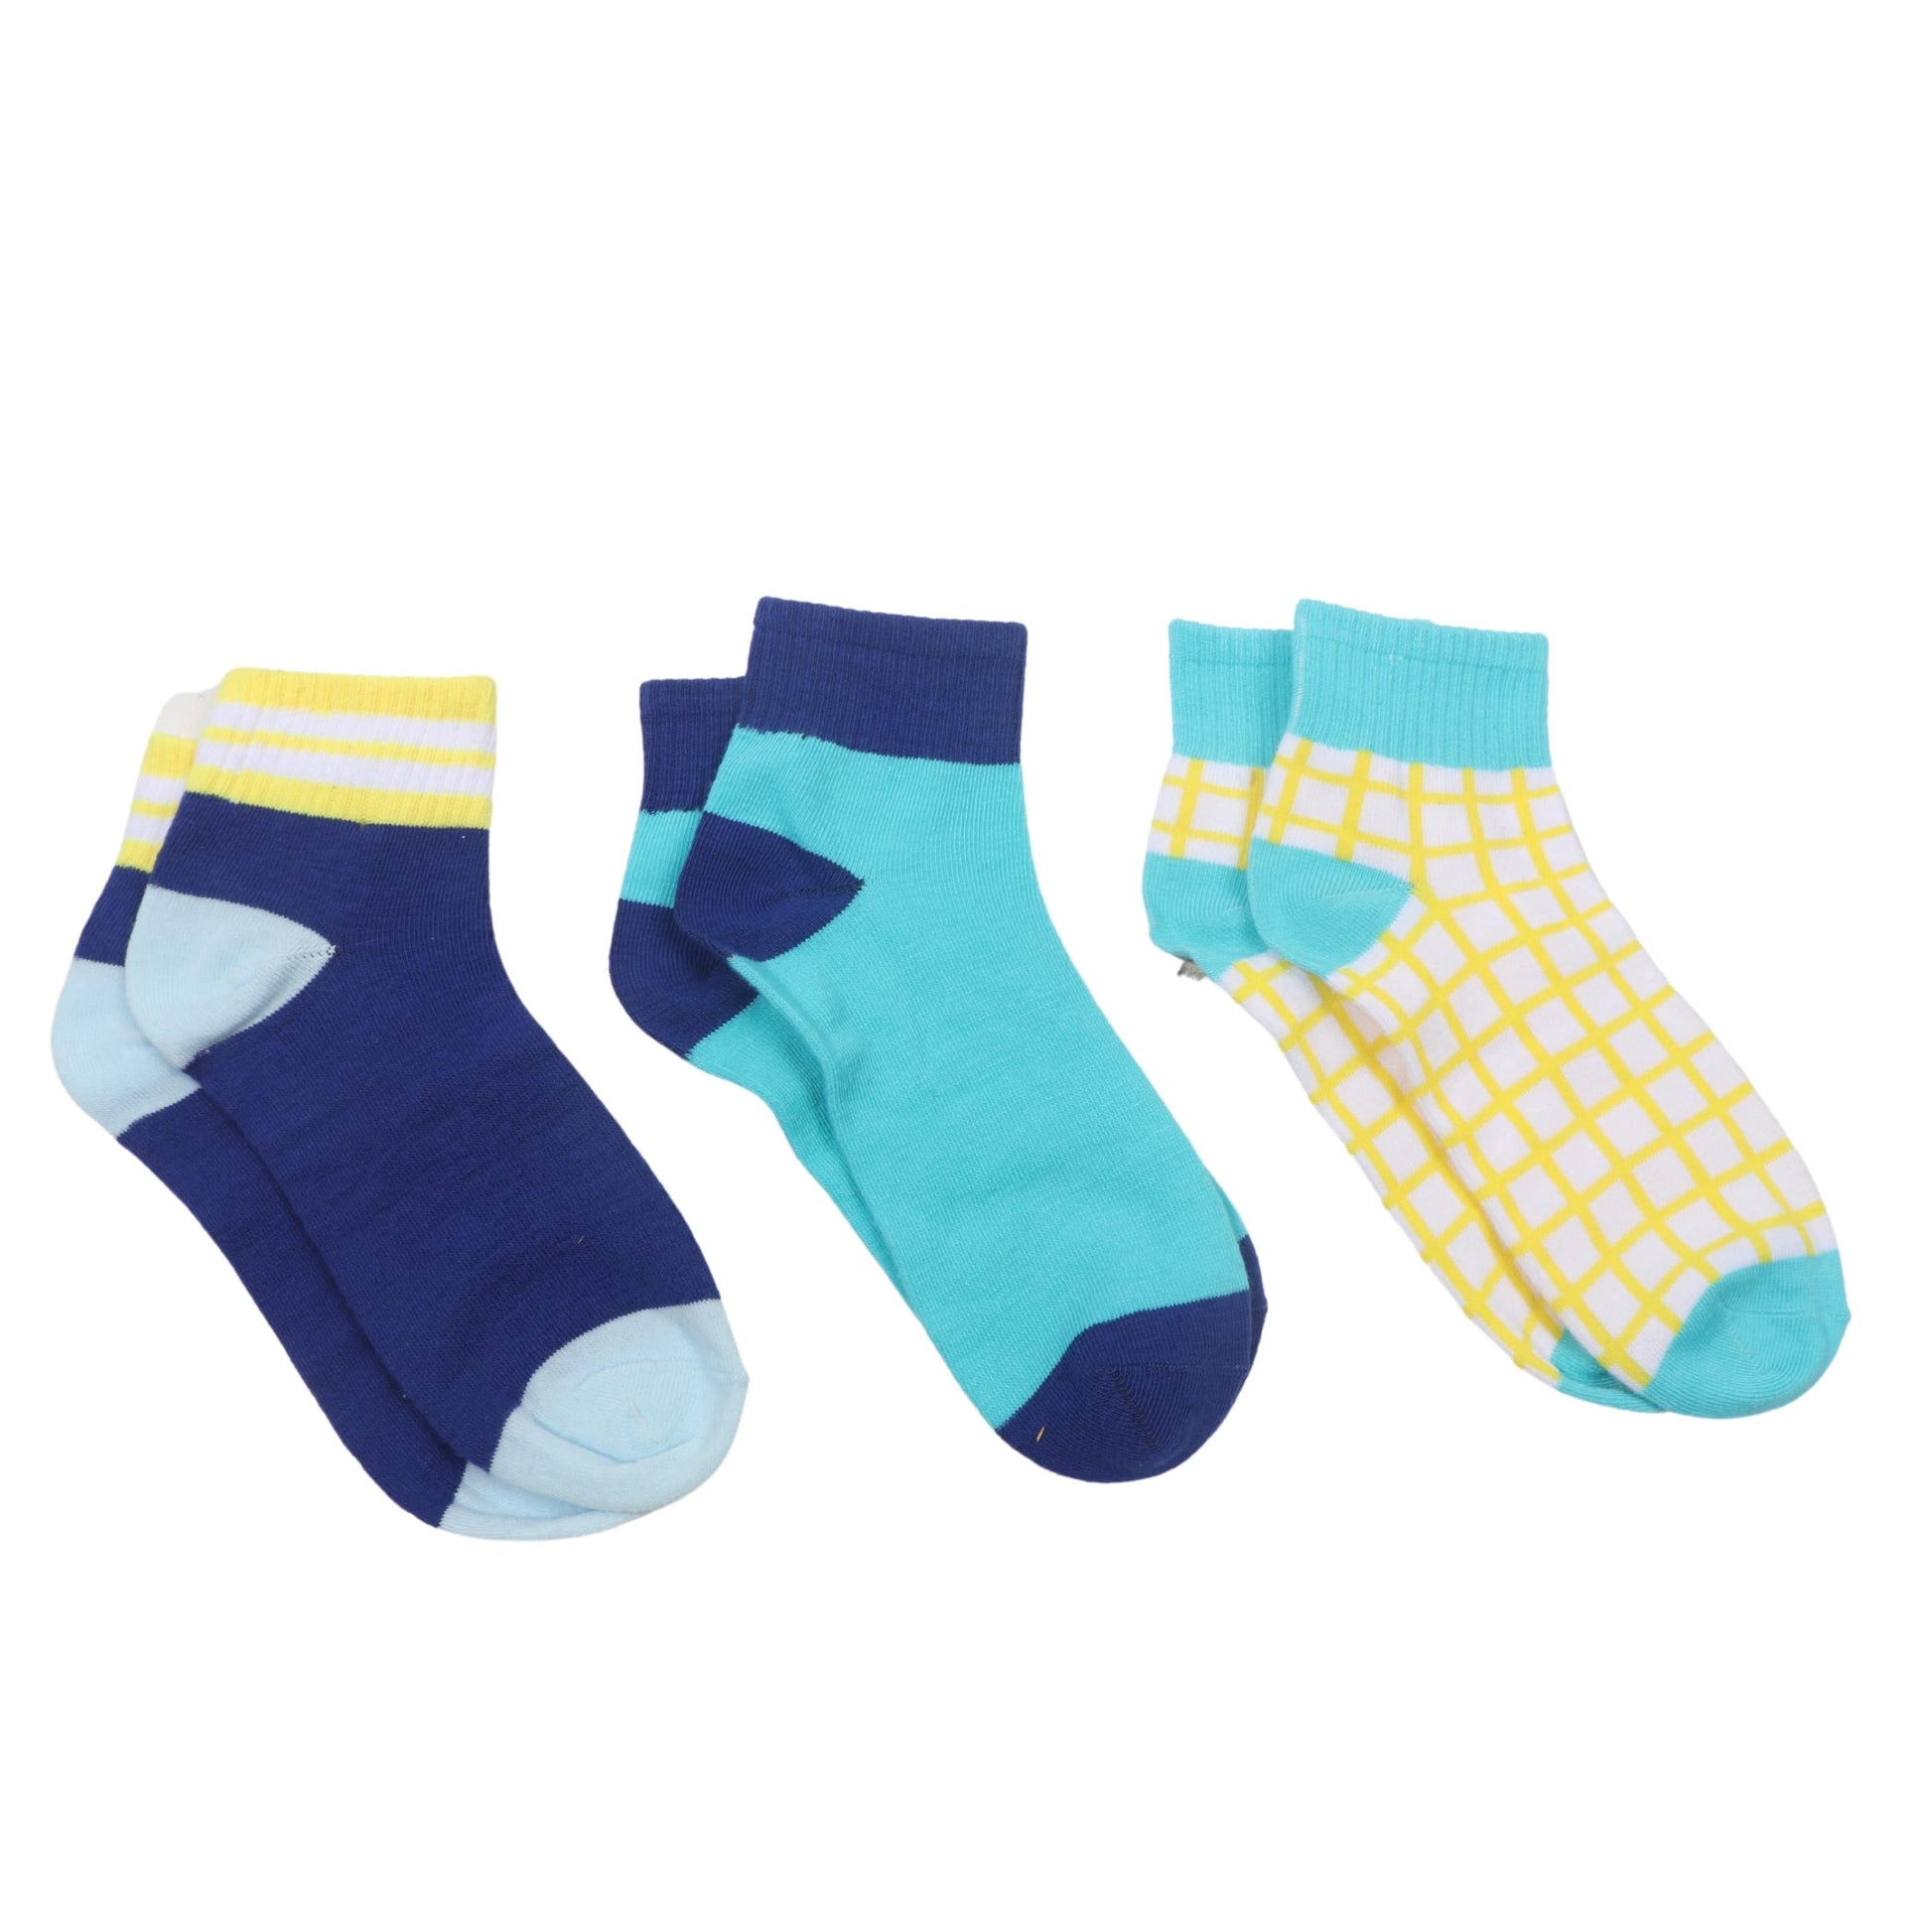 BRANDS & BEYOND Clothing Accessories 35-40 / Multi-Color Casual Socks Set